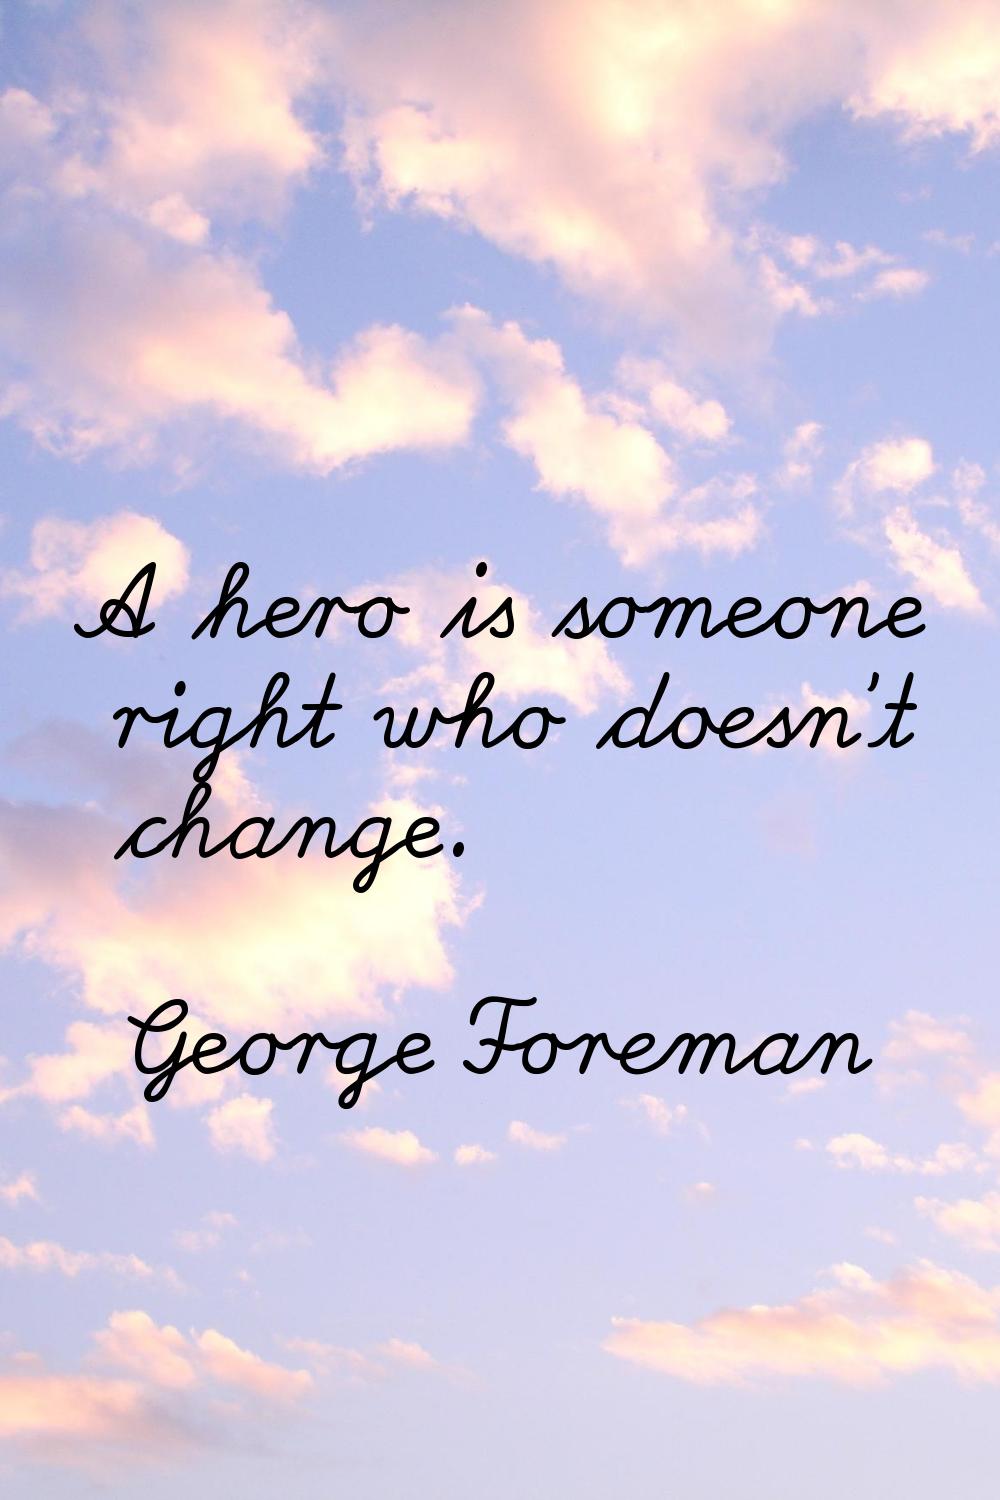 A hero is someone right who doesn't change.